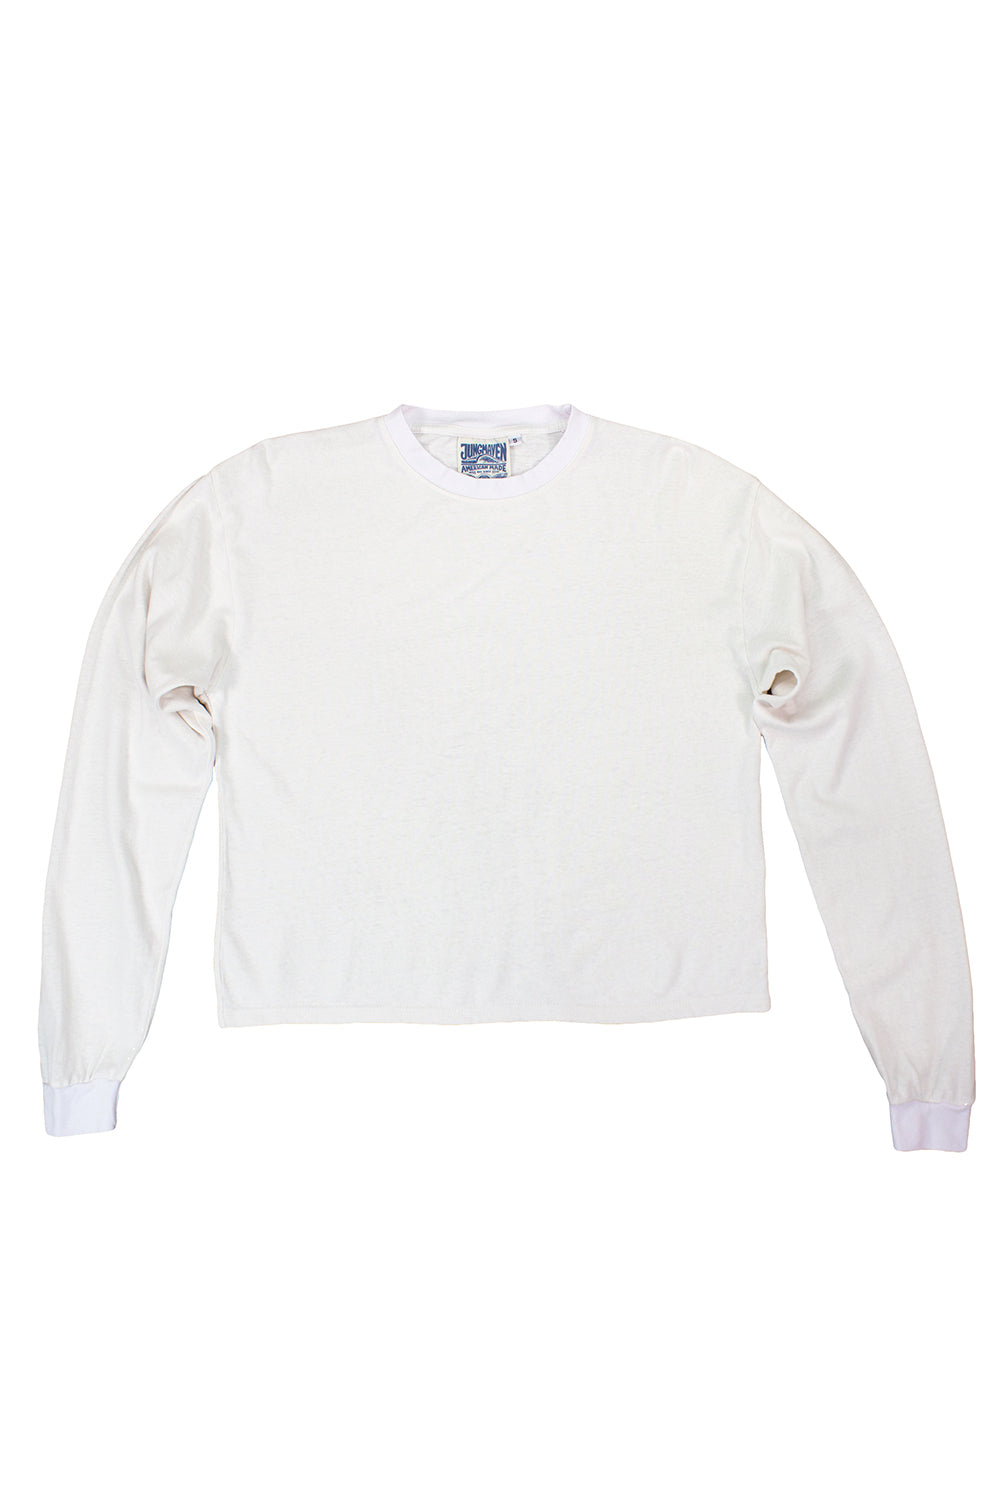 Cropped Long Sleeve Tee | Jungmaven Hemp Clothing & Accessories / Color: Washed White